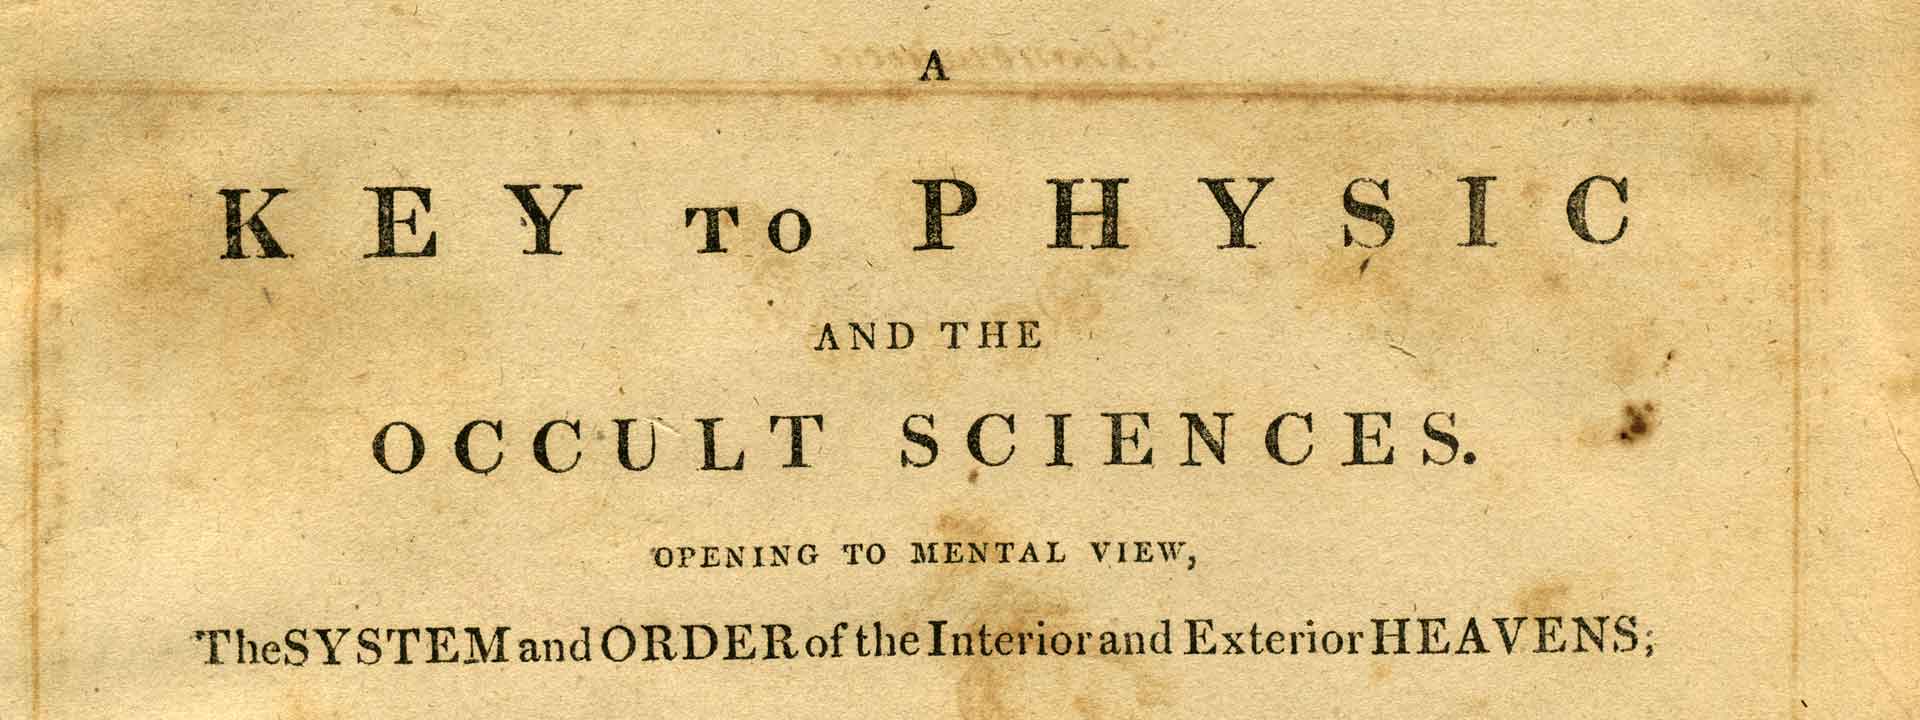 A Key to Physic and the Occult Sciences Title Page